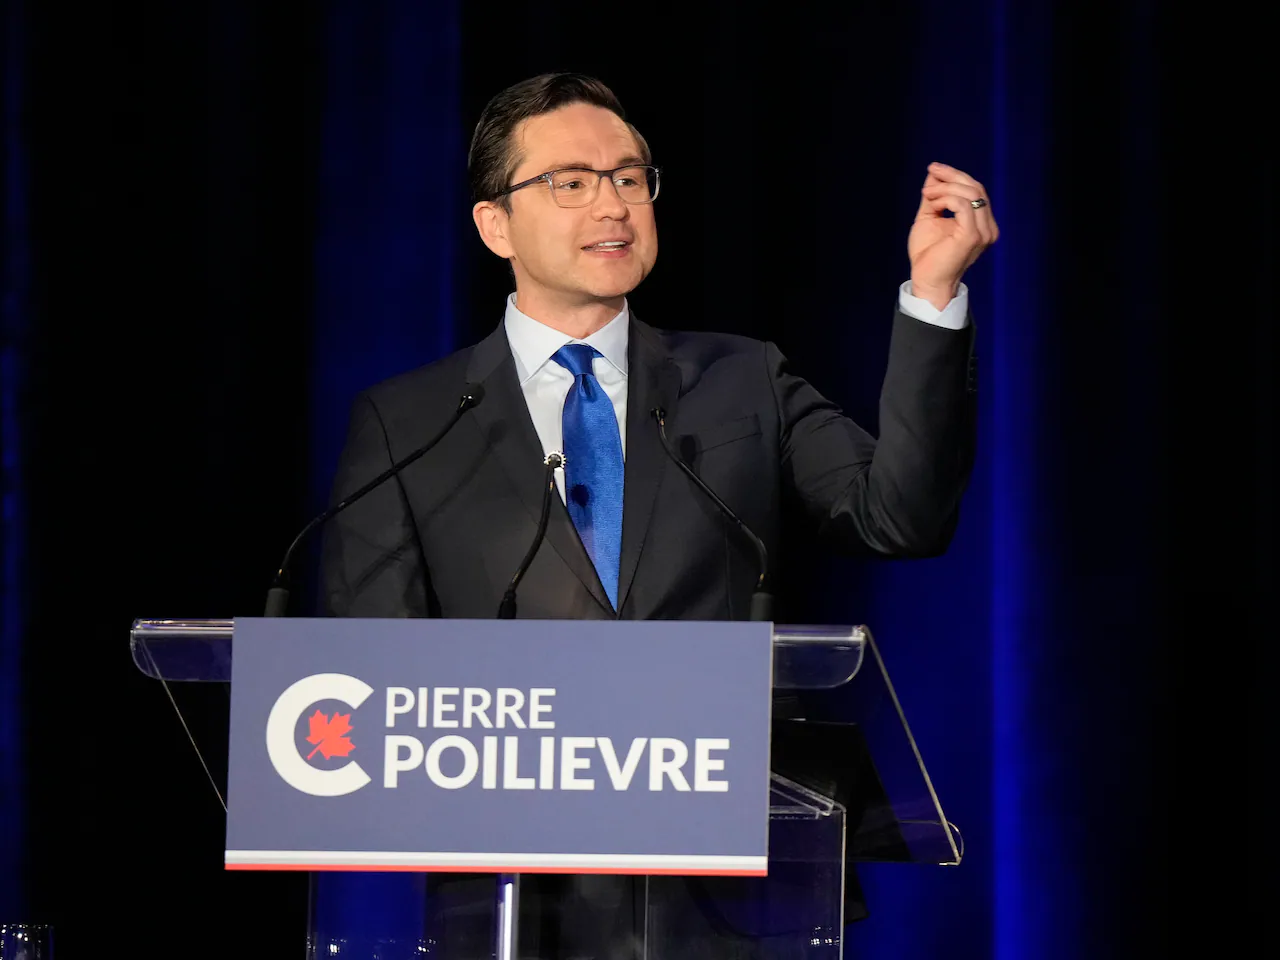 Pierre Poilievre wants to pass a law making it illegal to impose vaccine mandates